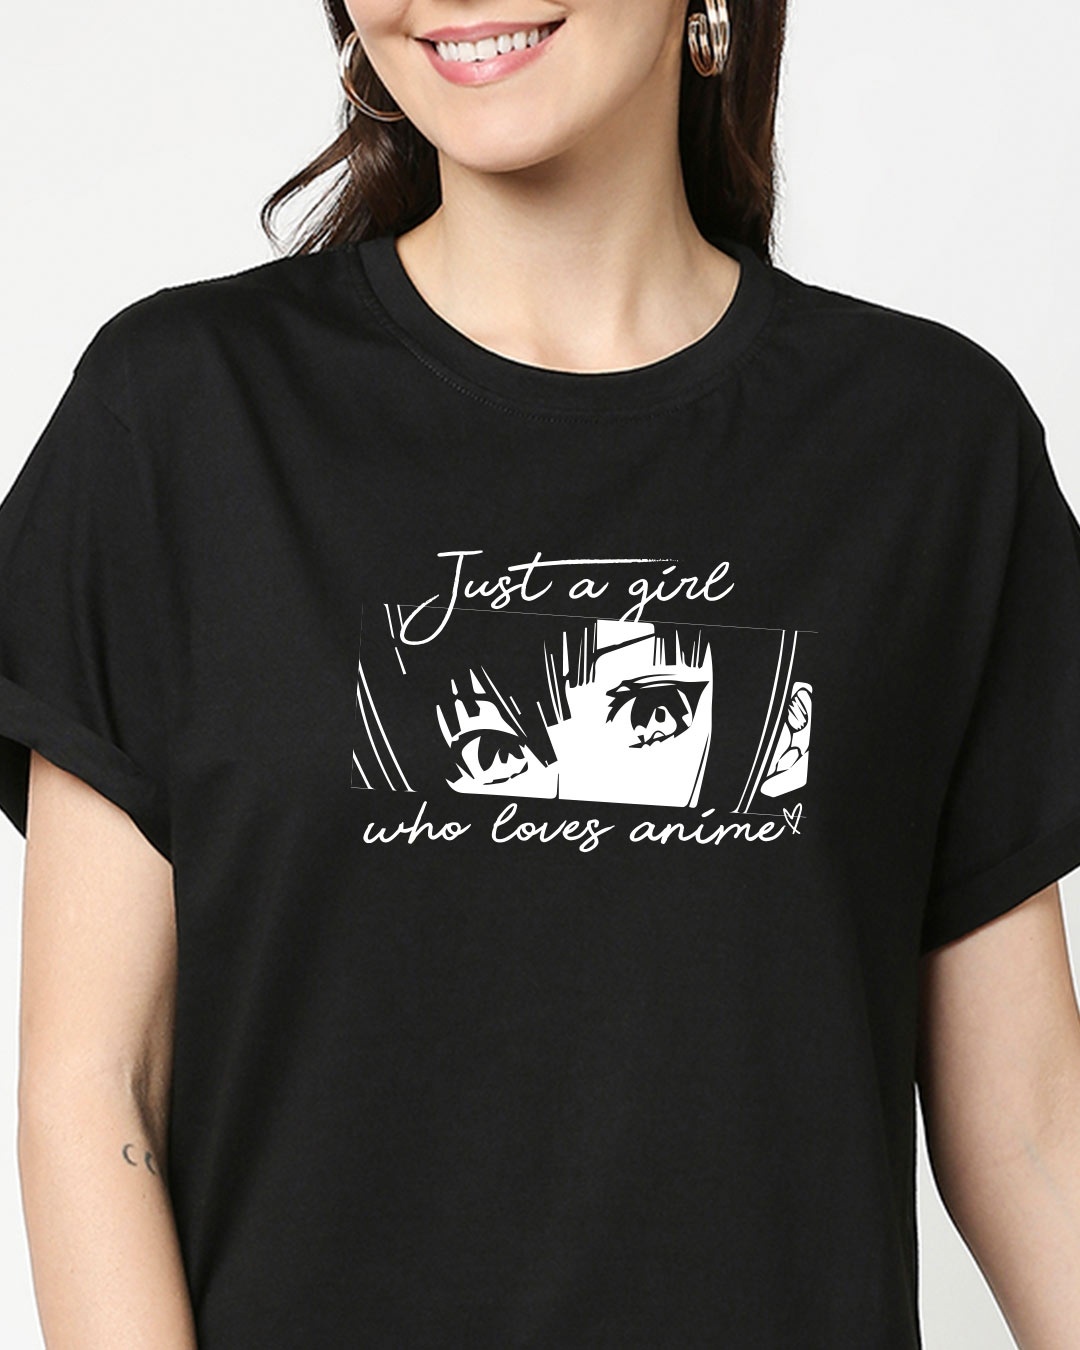 Anime T-Shirts for Sale | Redbubble